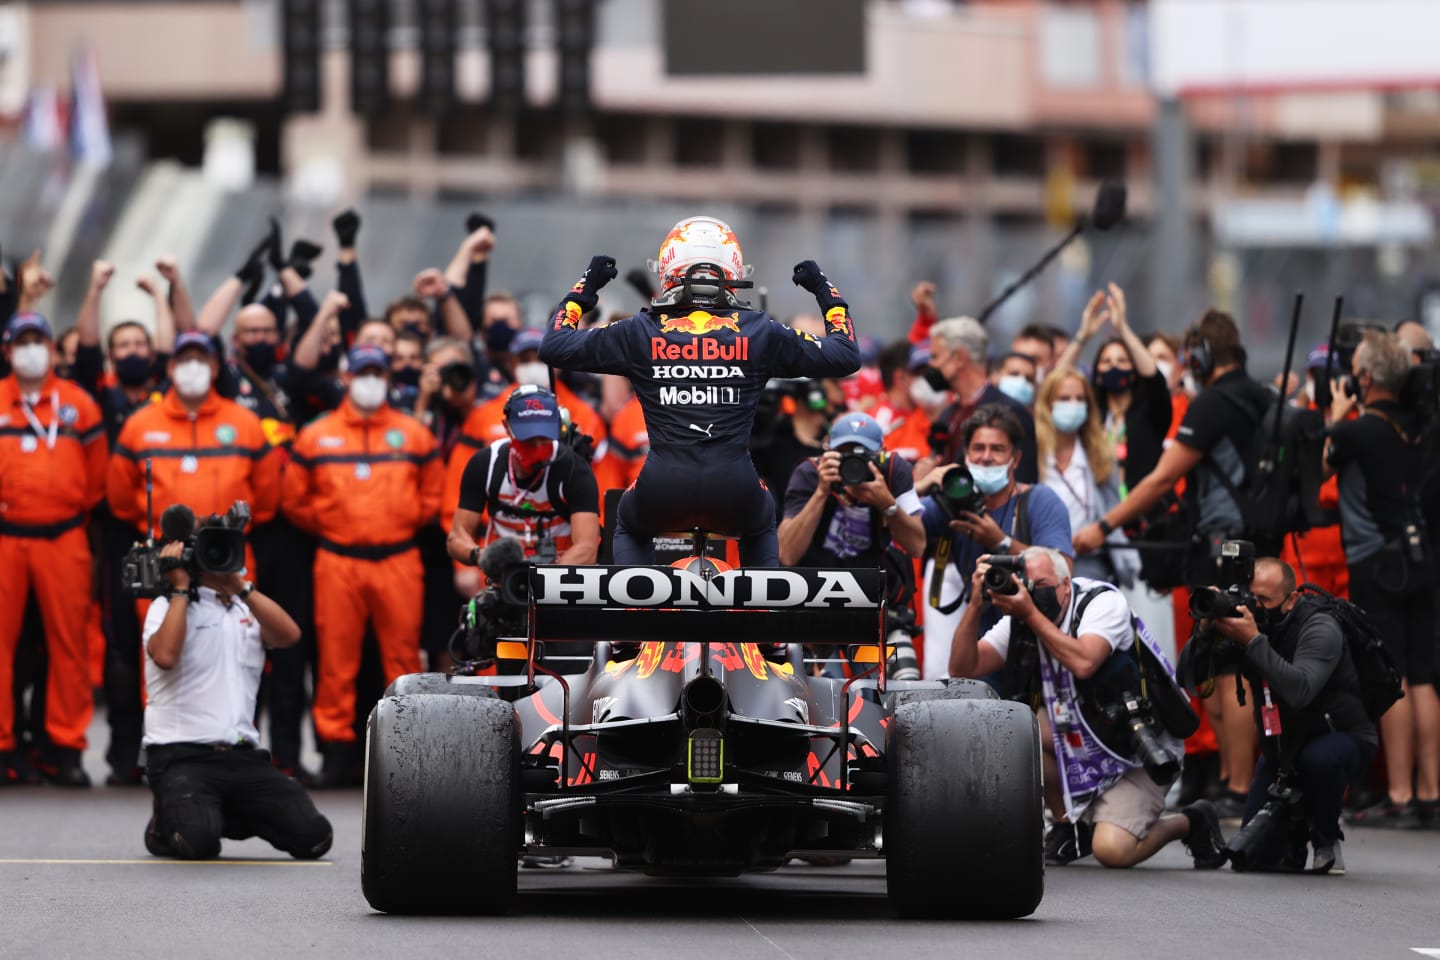 MONTE-CARLO, MONACO - MAY 23: Race winner Max Verstappen of Netherlands and Red Bull Racing celebrates in parc ferme during the F1 Grand Prix of Monaco at Circuit de Monaco on May 23, 2021 in Monte-Carlo, Monaco. (Photo by Lars Baron/Getty Images)